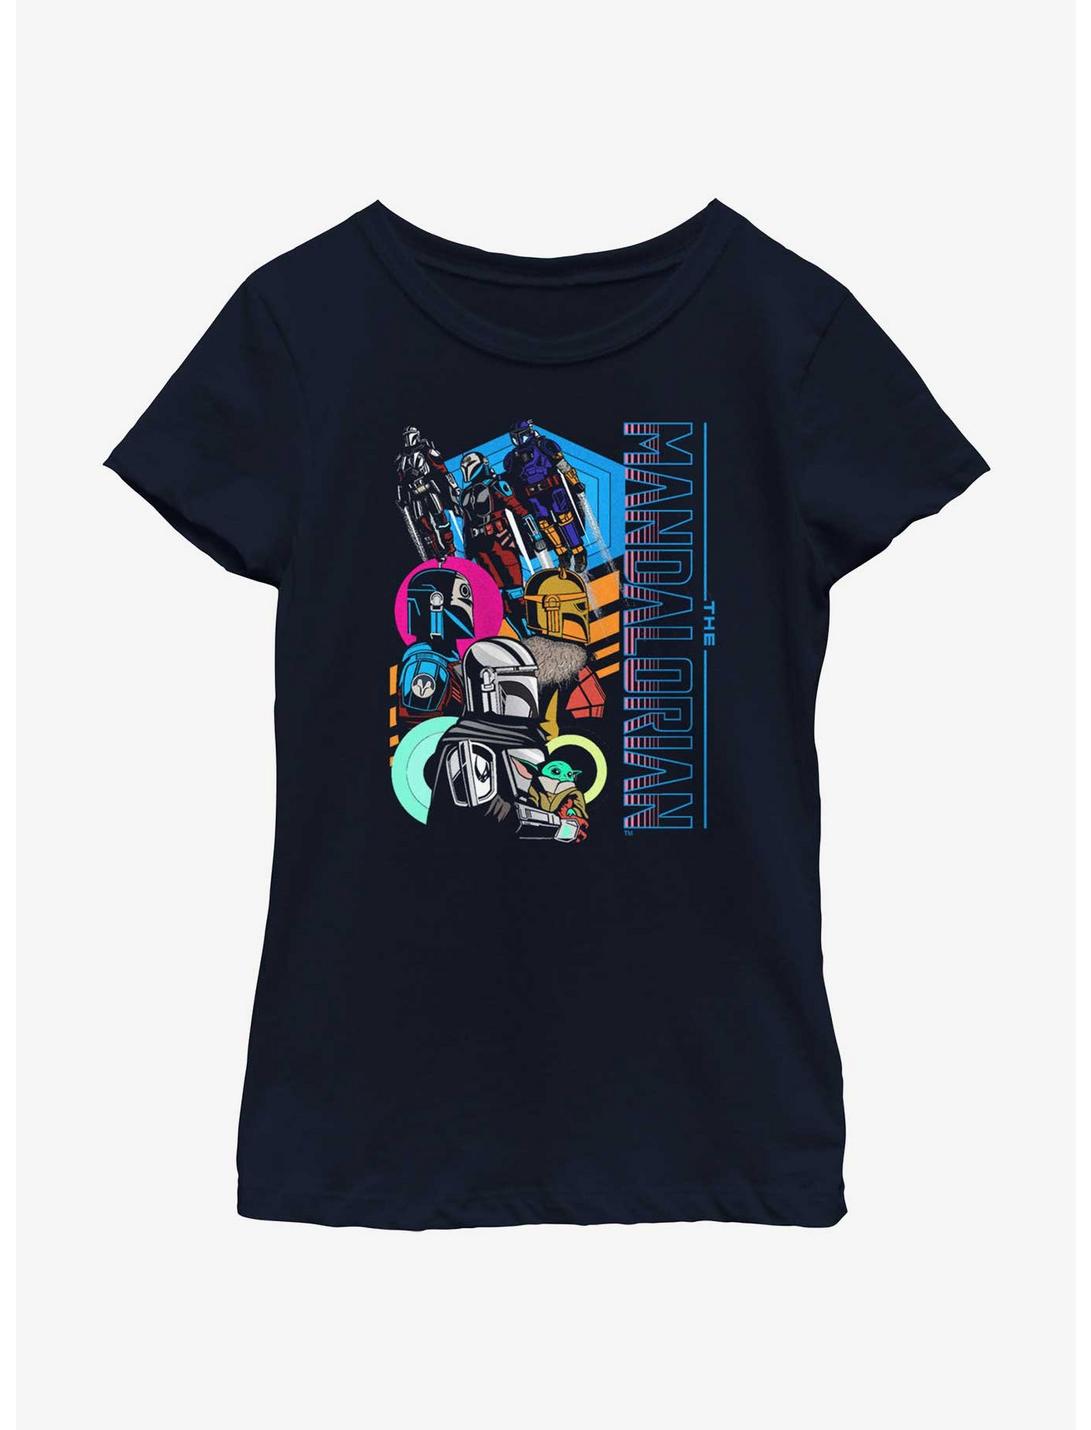 Star Wars The Mandalorian Fearsome Warriors Portrait Youth Girls T-Shirt, NAVY, hi-res